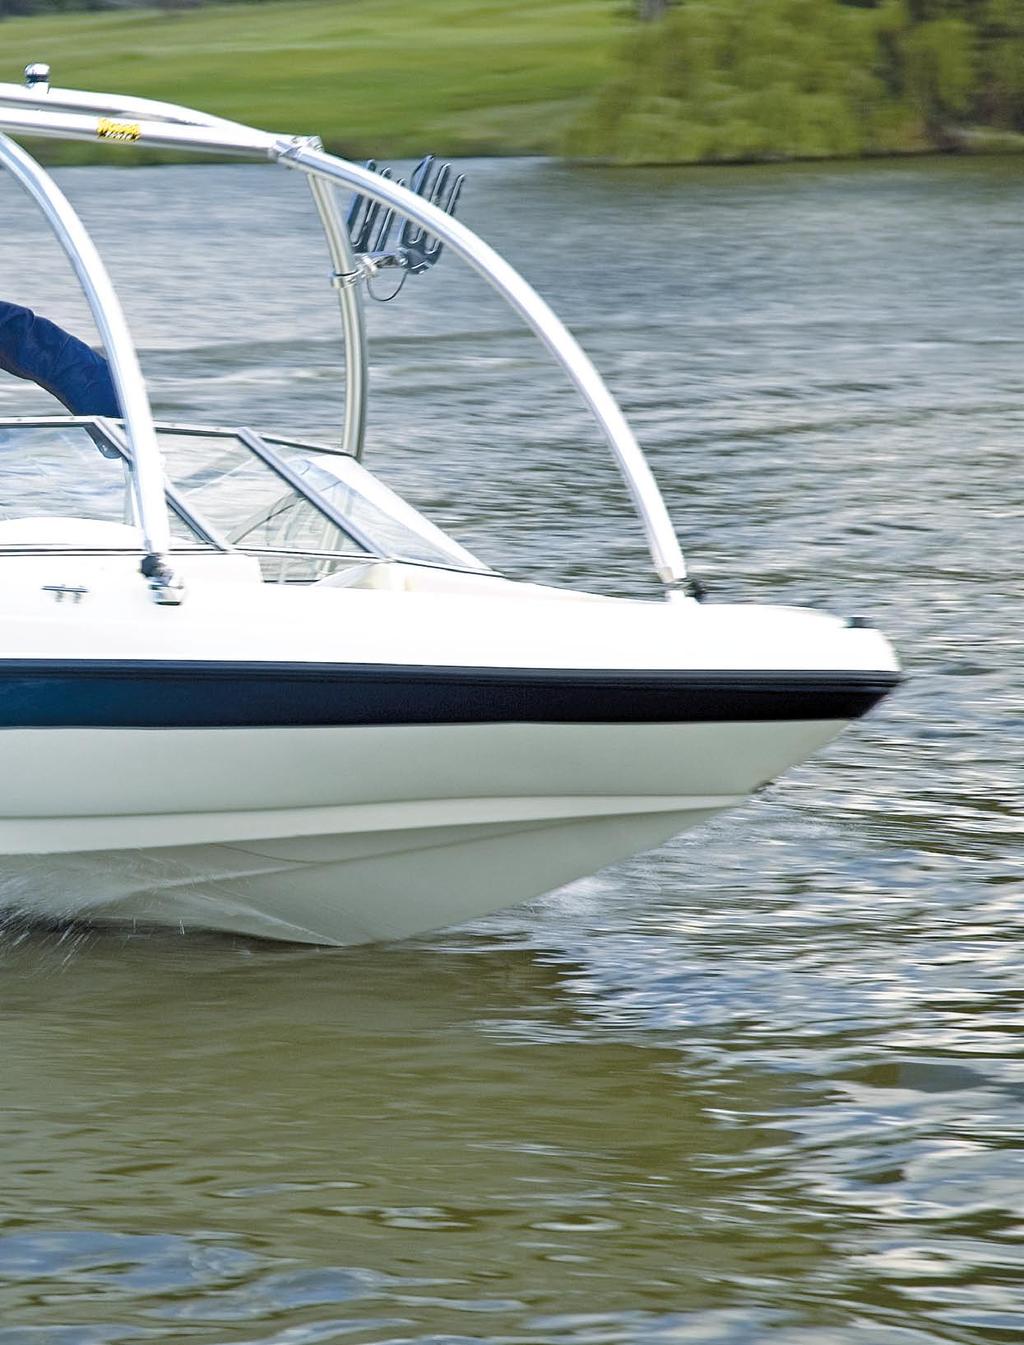 The versatile, up-market Sensation 1800LS series of sports boat, perfect for skiing, cruising the river or just plain having fun, is manufactured right here in South Africa by Twin Boats and Trailers